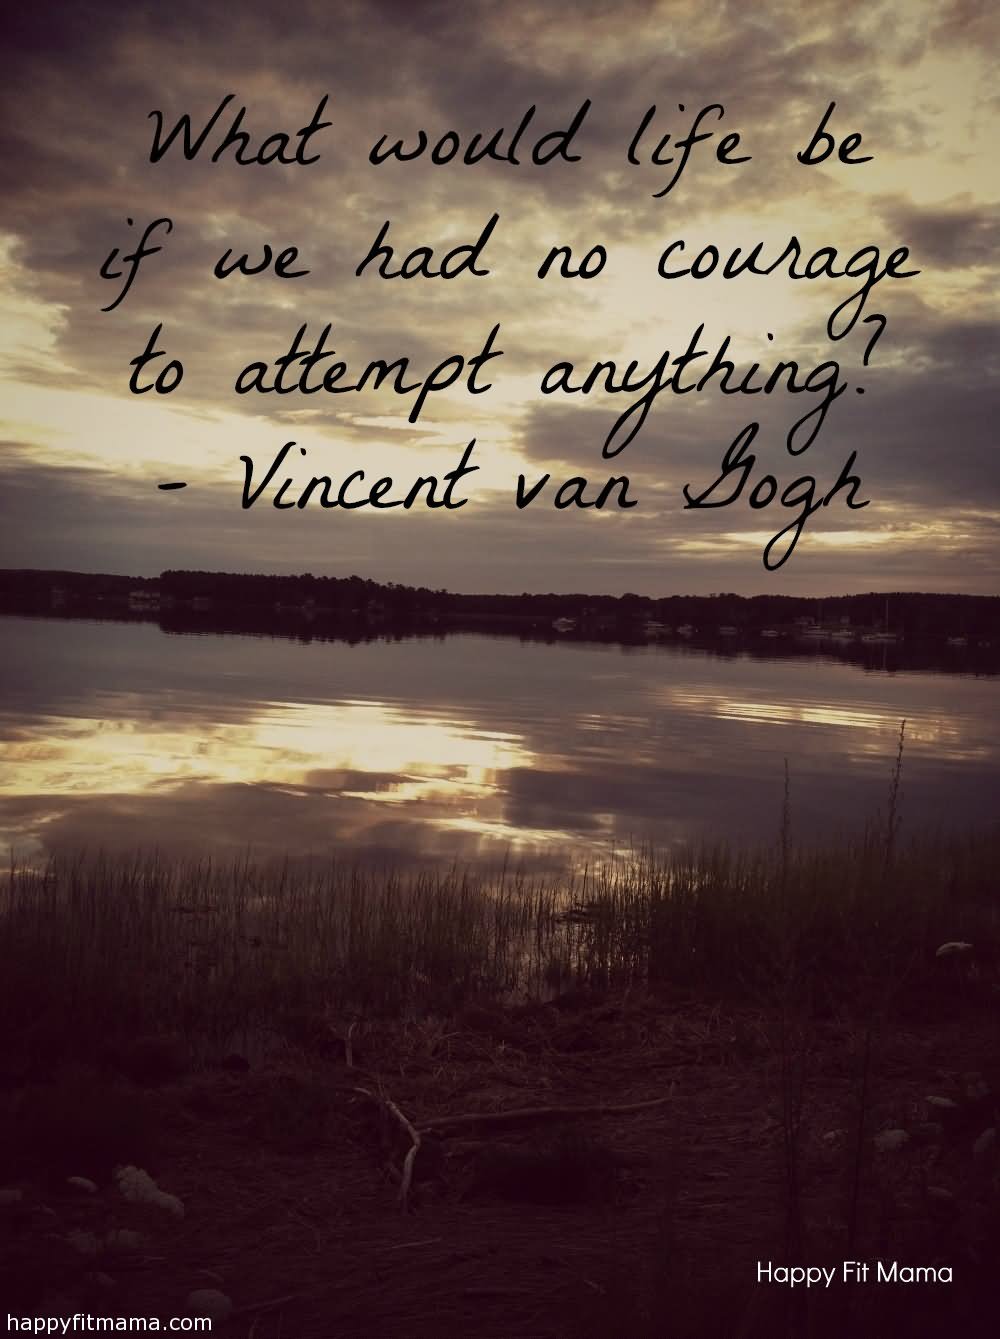 What would life be if we had no courage to attempt anything - Vincent Van Gogh